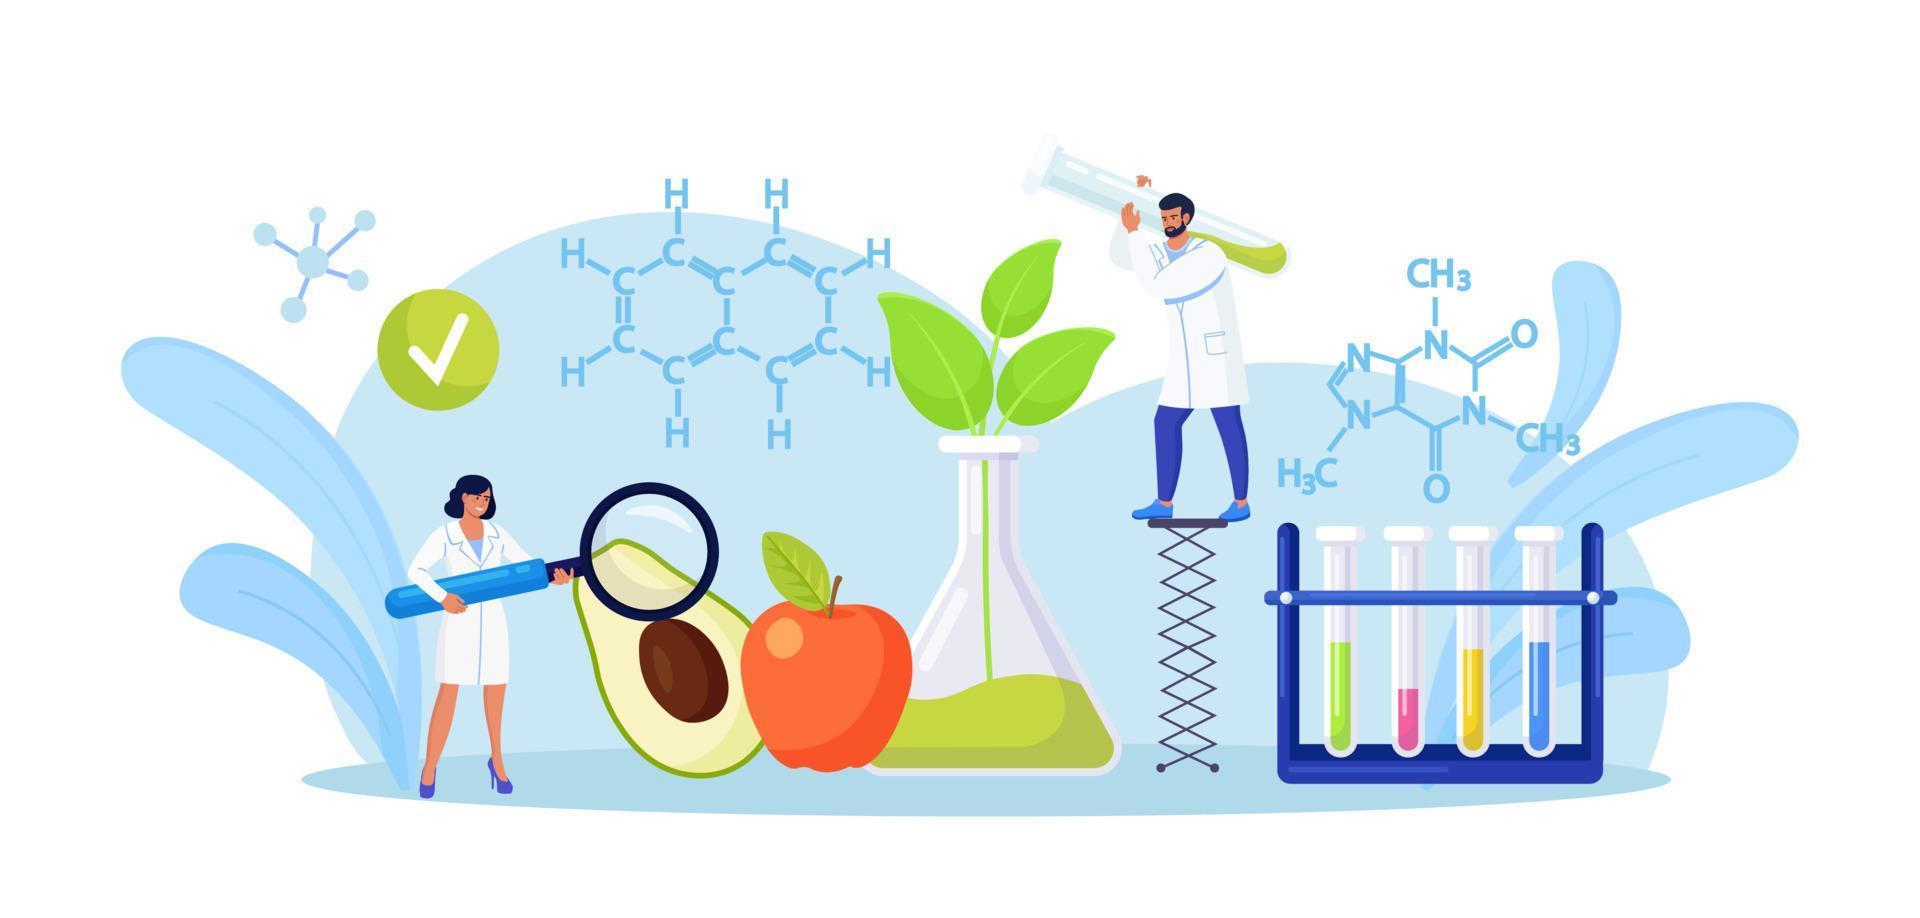 Biology scientists doing research on fruits, vegetables. People cultivating plants in lab. Food additives study. Genetic engineering. Genetically modified foods, gene technology vector